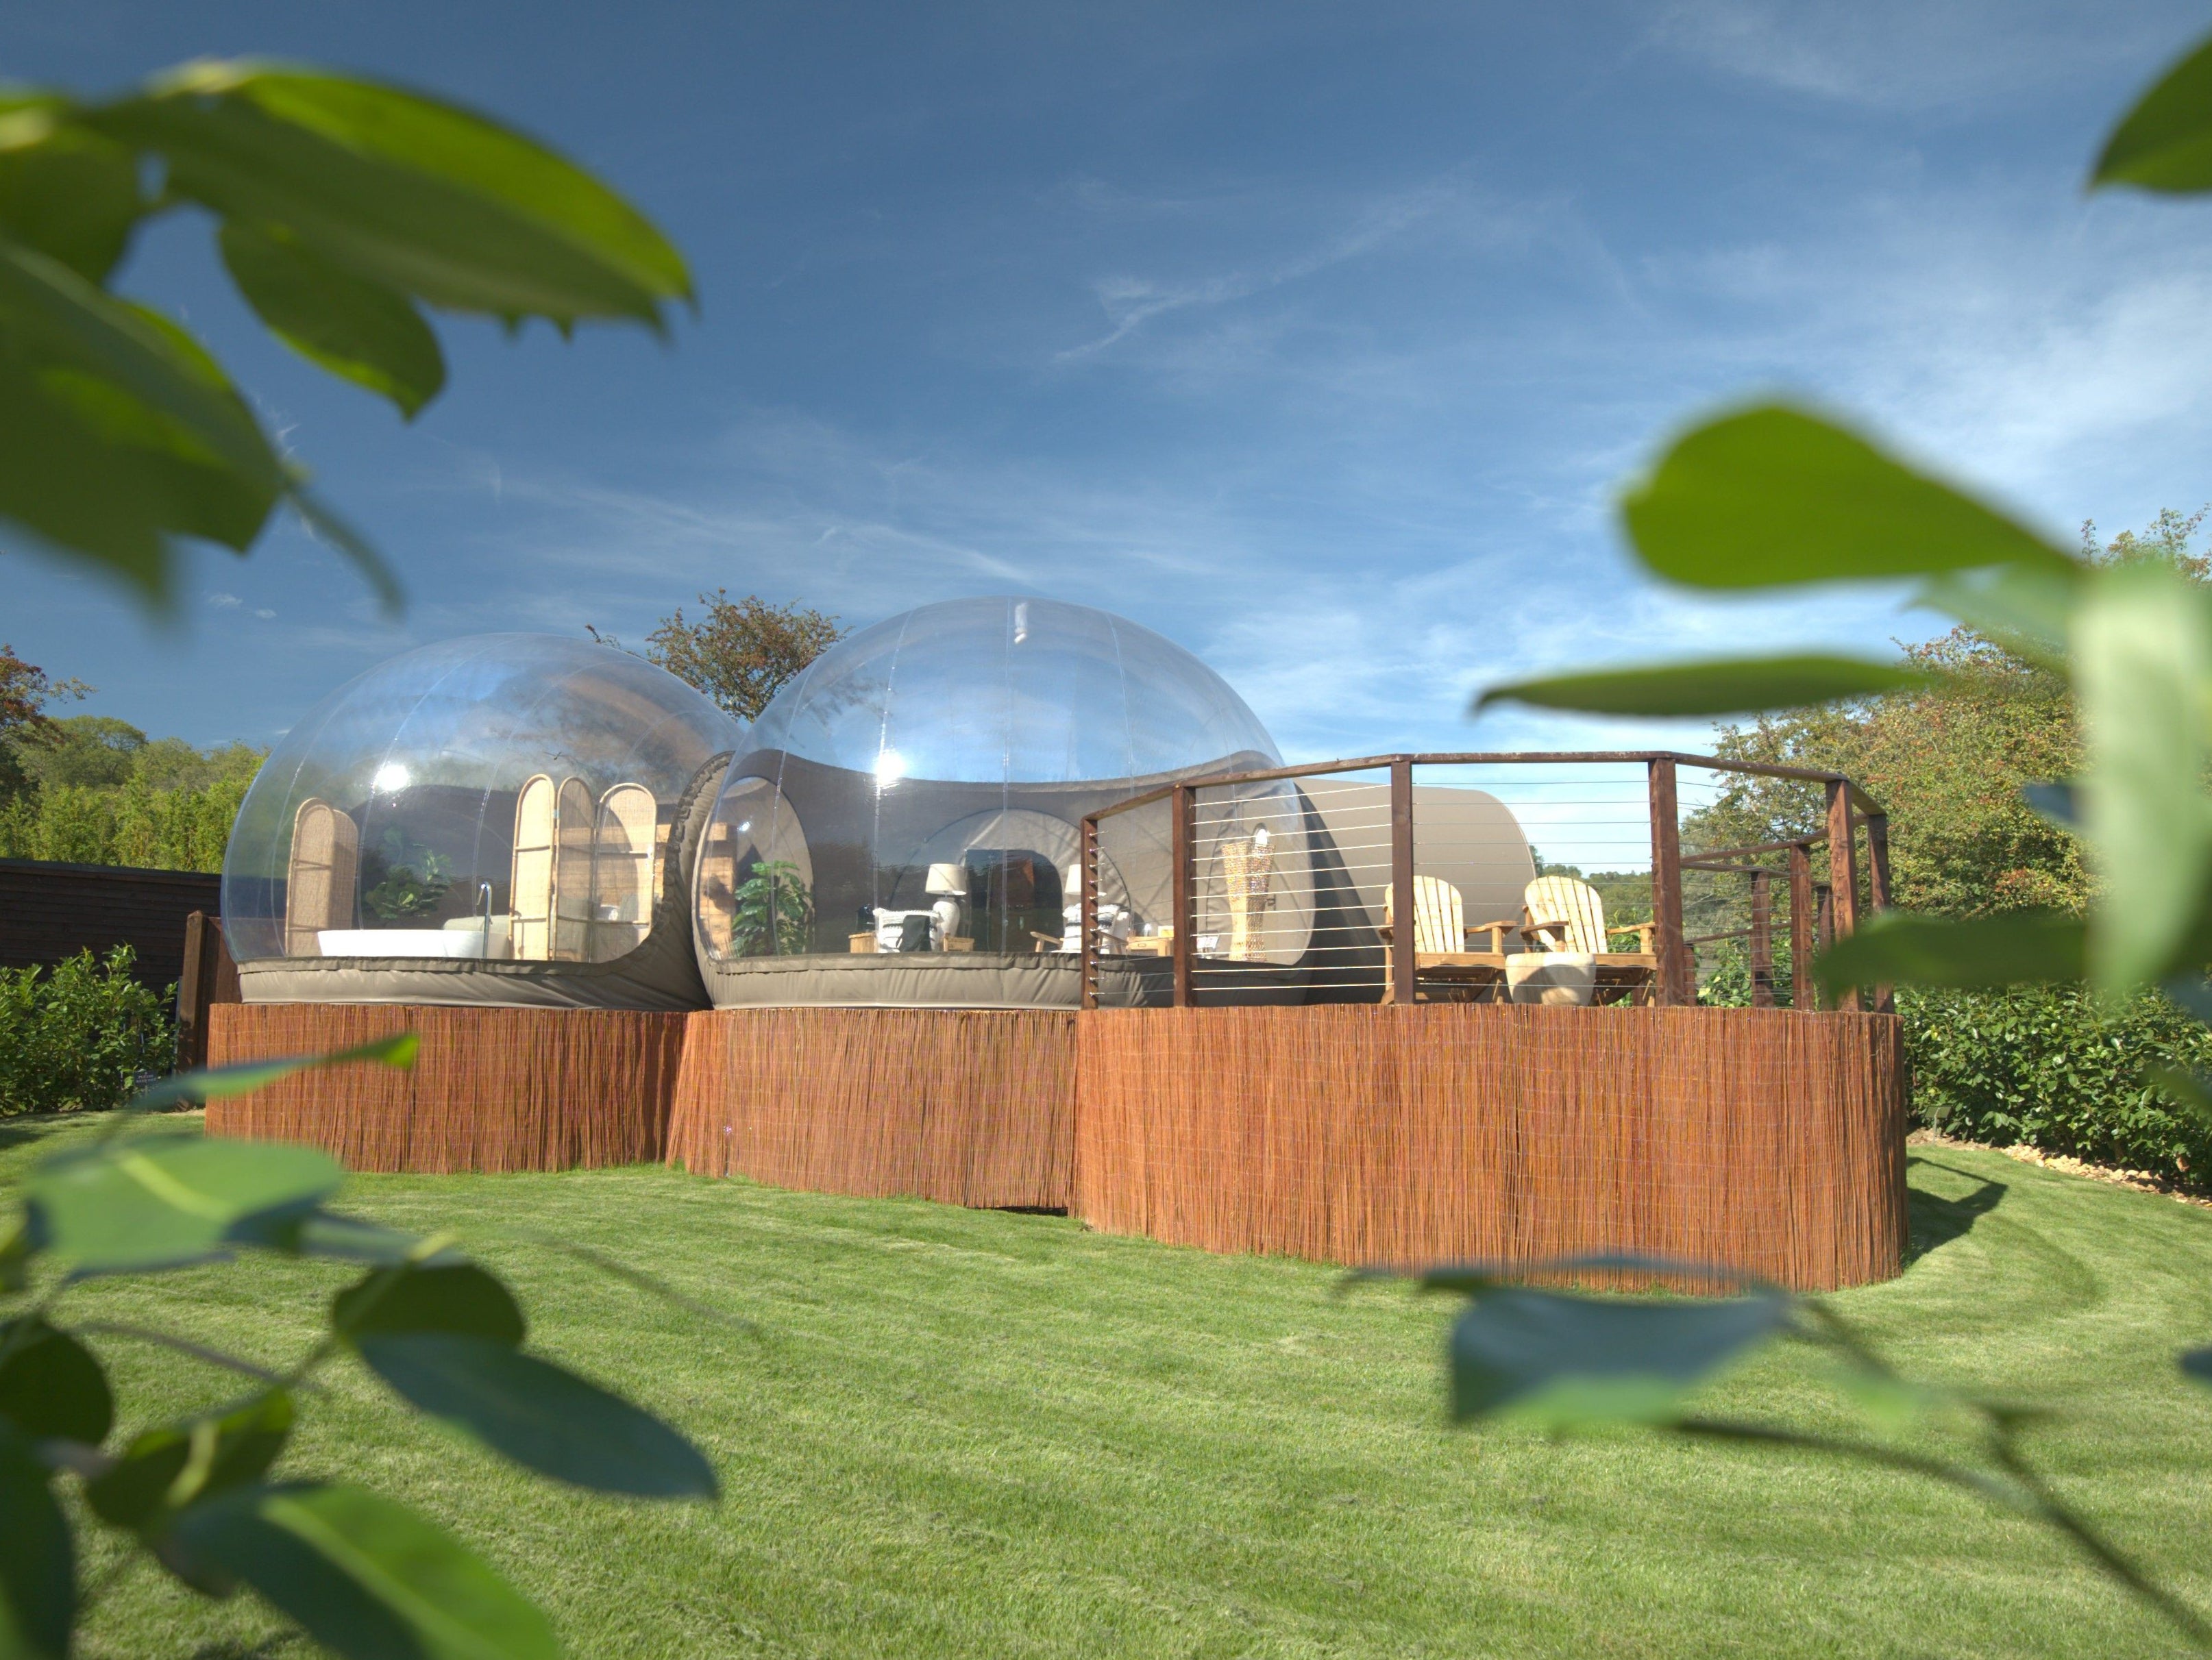 The new accommodation comprises two adjoining transparent domes